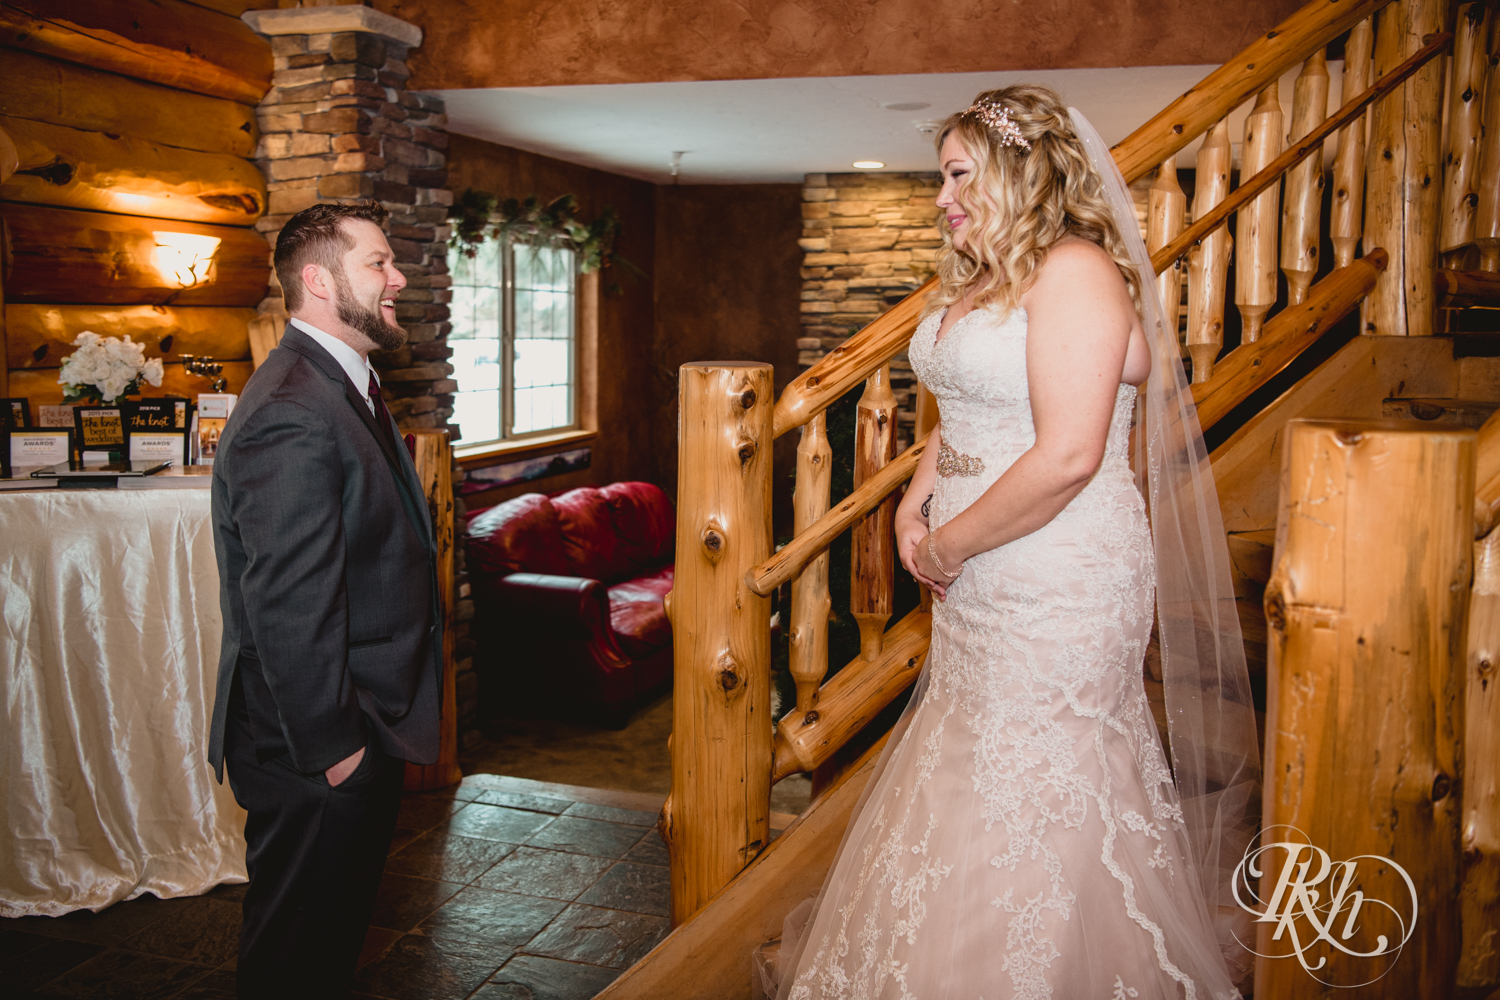 Bride and groom see each other at first look at Whitefish Lodge in Crosslake, Minnesota.